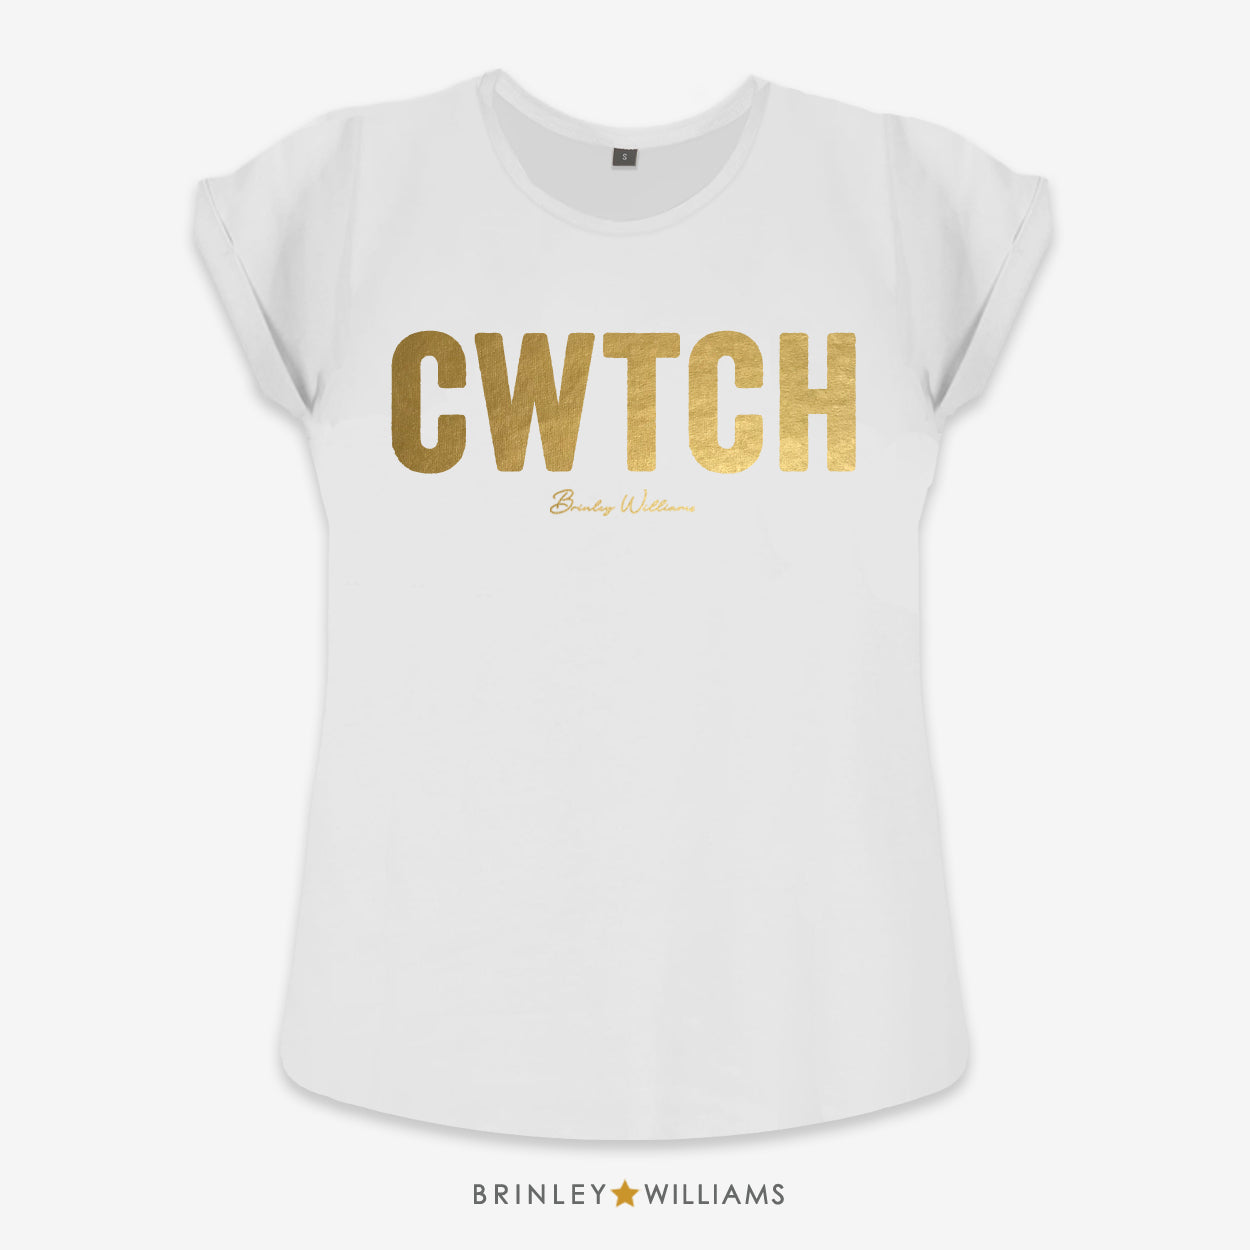 Big Cwtch Rolled Sleeve T-shirt - White